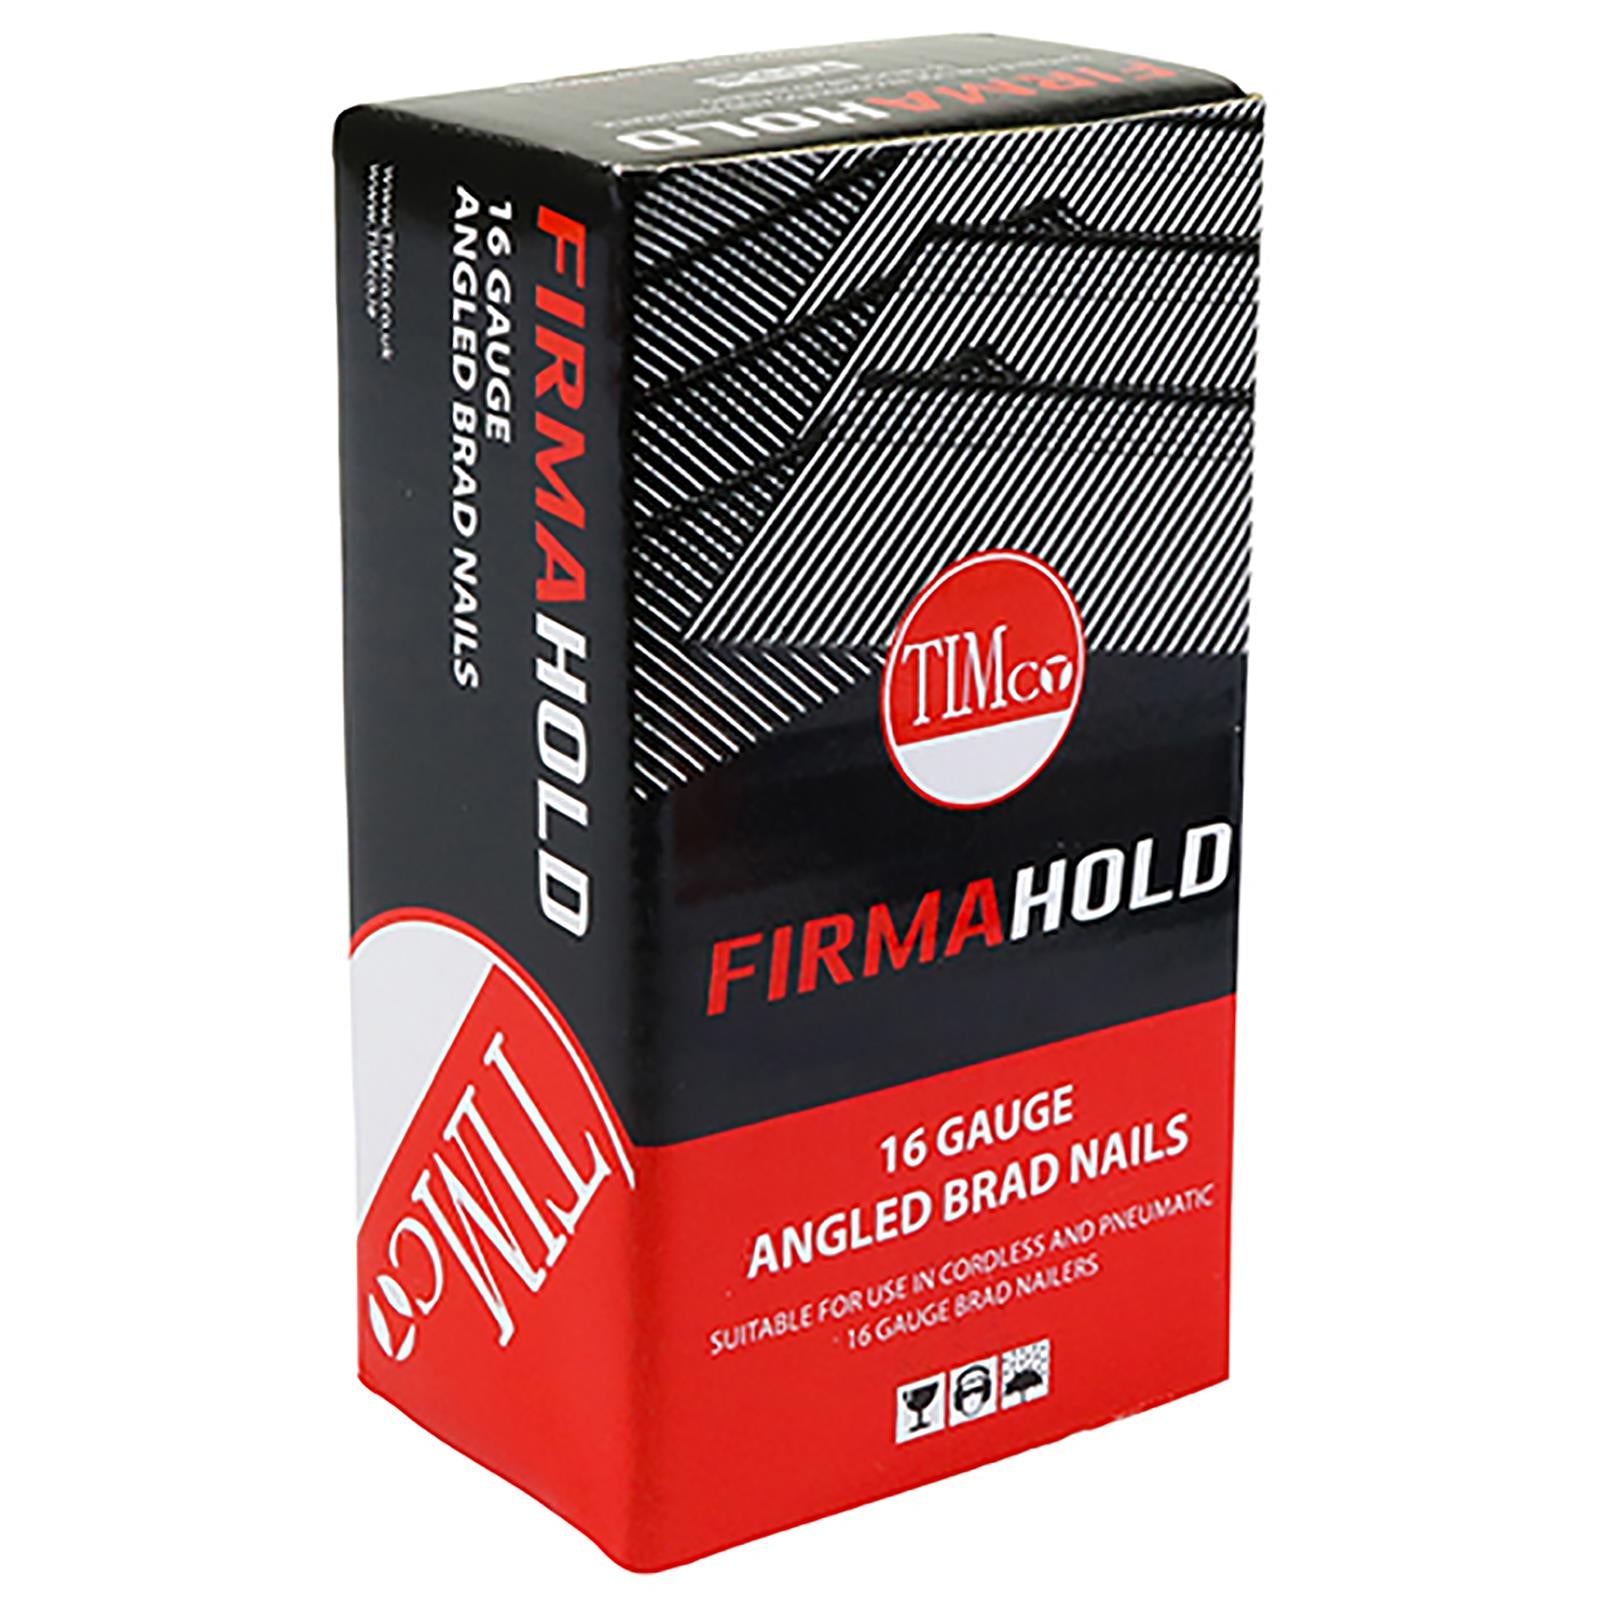 TIMCO FirmaHold Angled Brads Galvanised without Gas 16 Gauge 2000 Nails